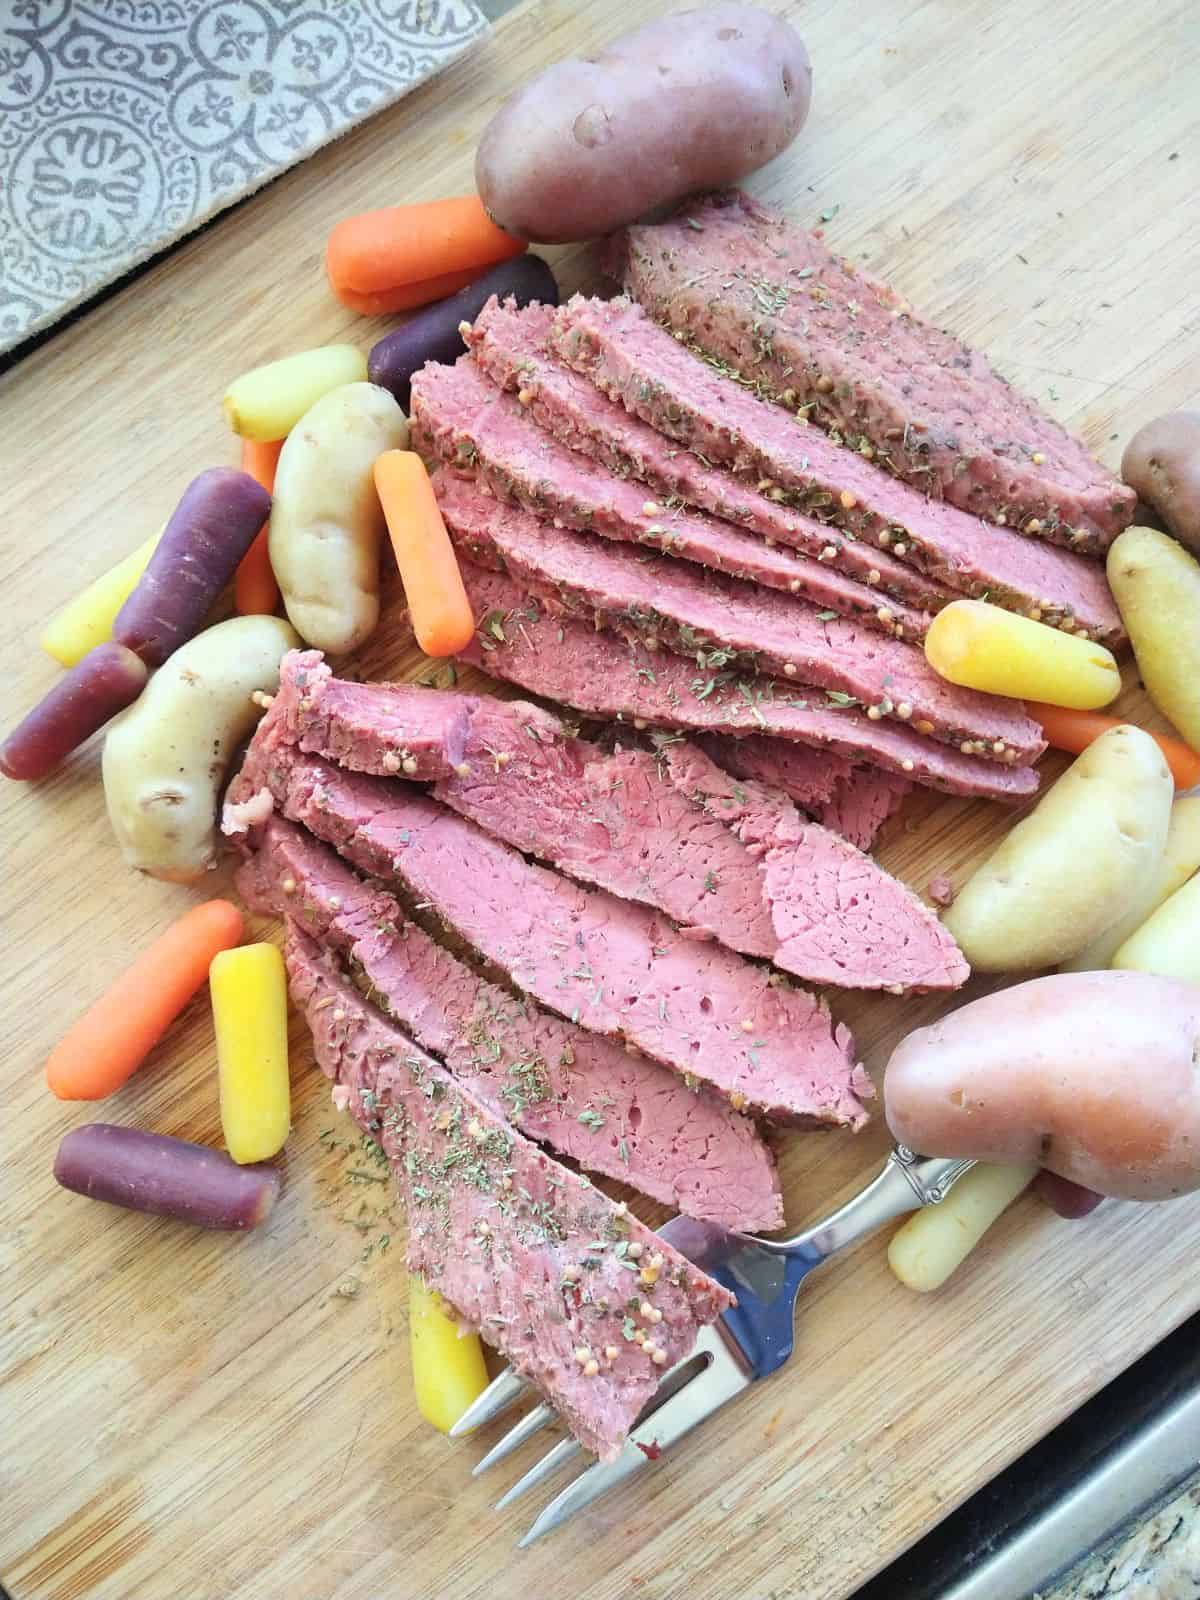 Slices of cooked corned beef with spices on the outside are stacked up on a cutting board with rainbow baby carrots and white and red fingerling potatoes.